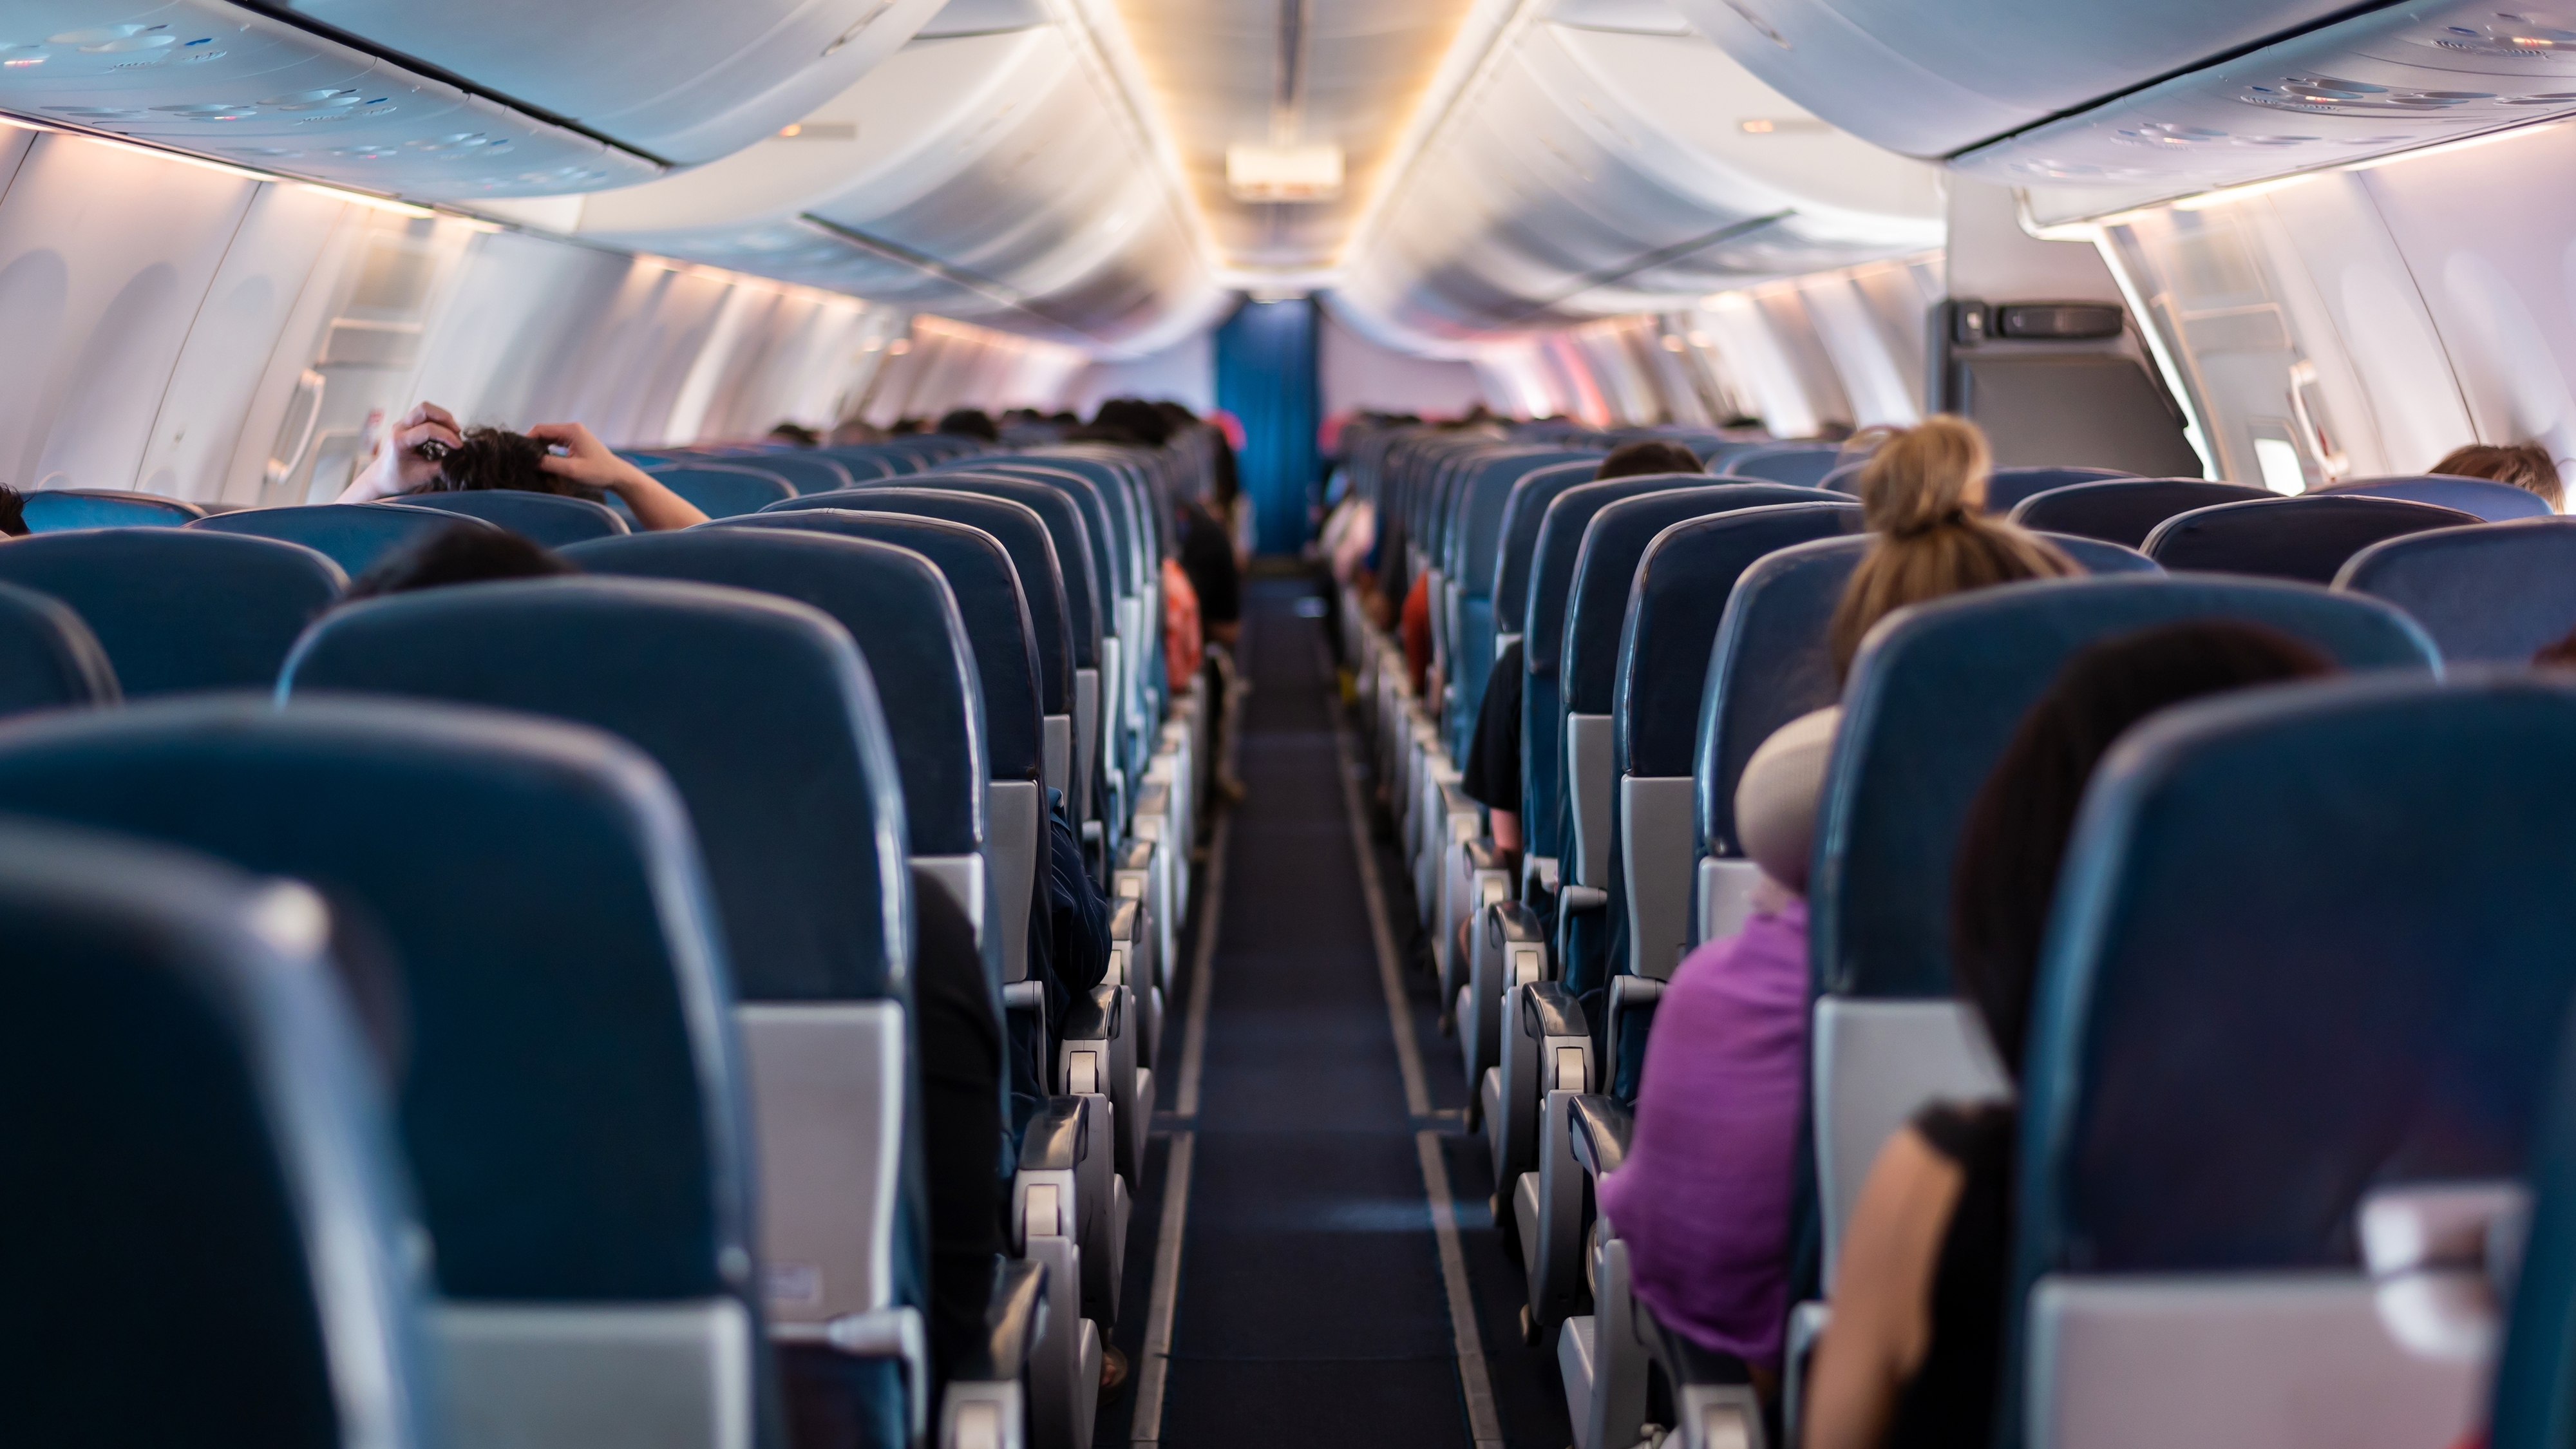 Matt had to stay in economy class while everyone else was in first class. | Source: Shutterstock